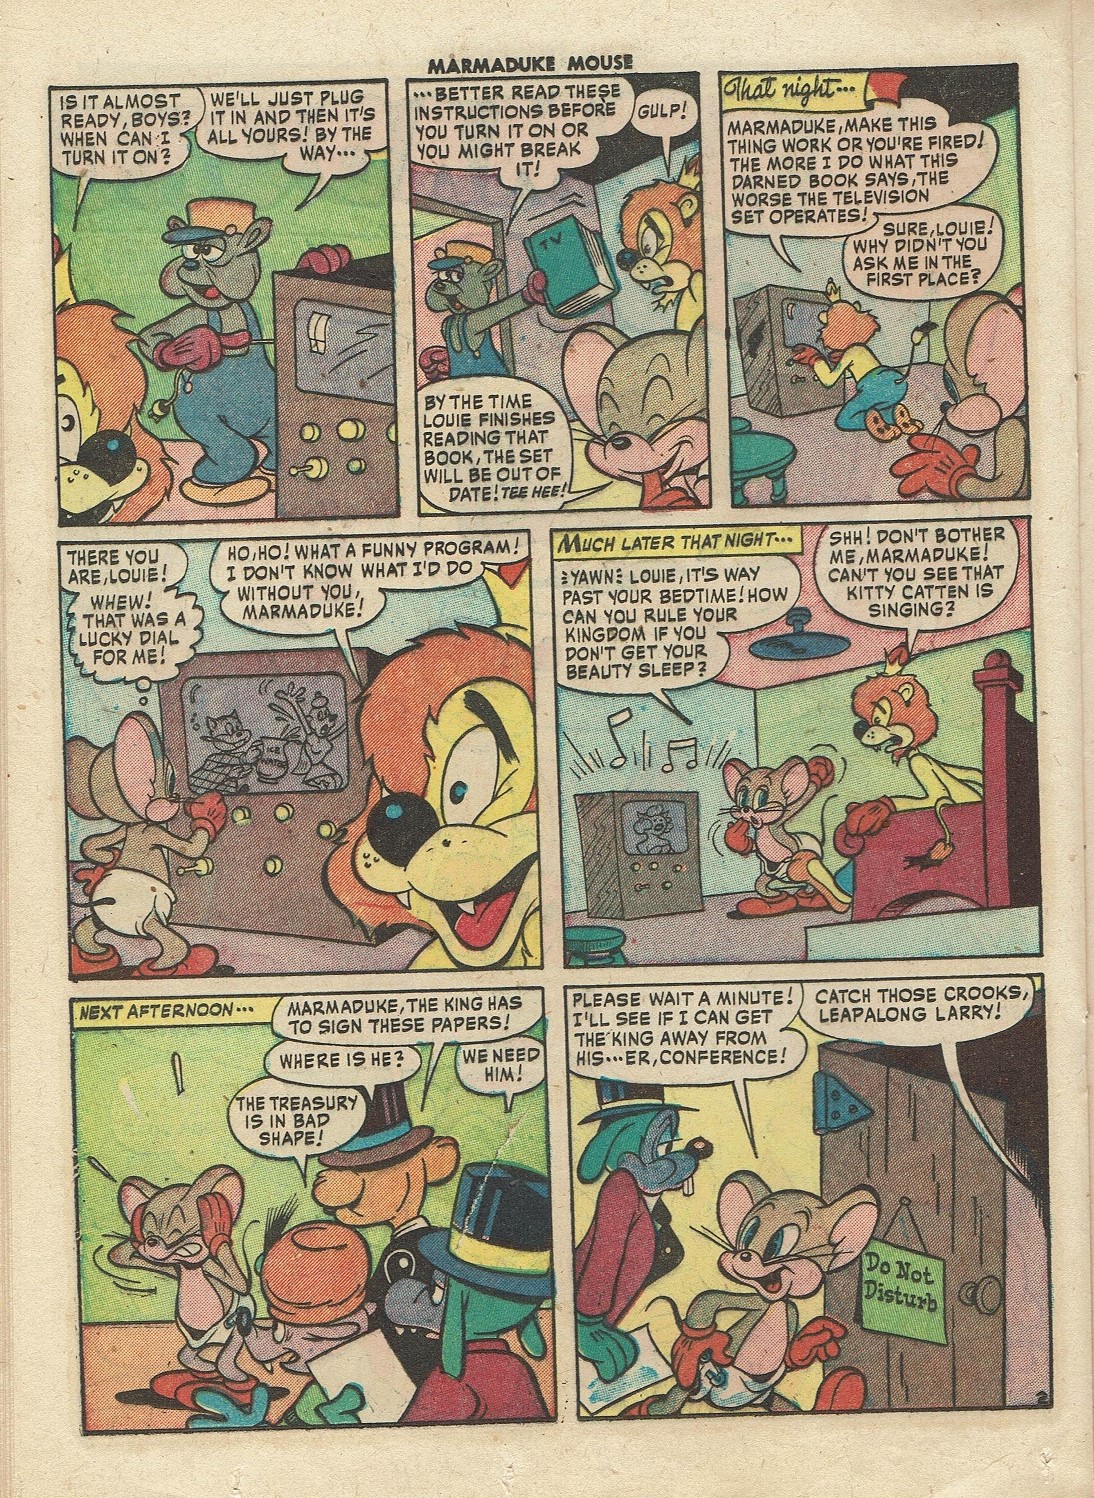 Read online Marmaduke Mouse comic -  Issue #29 - 20